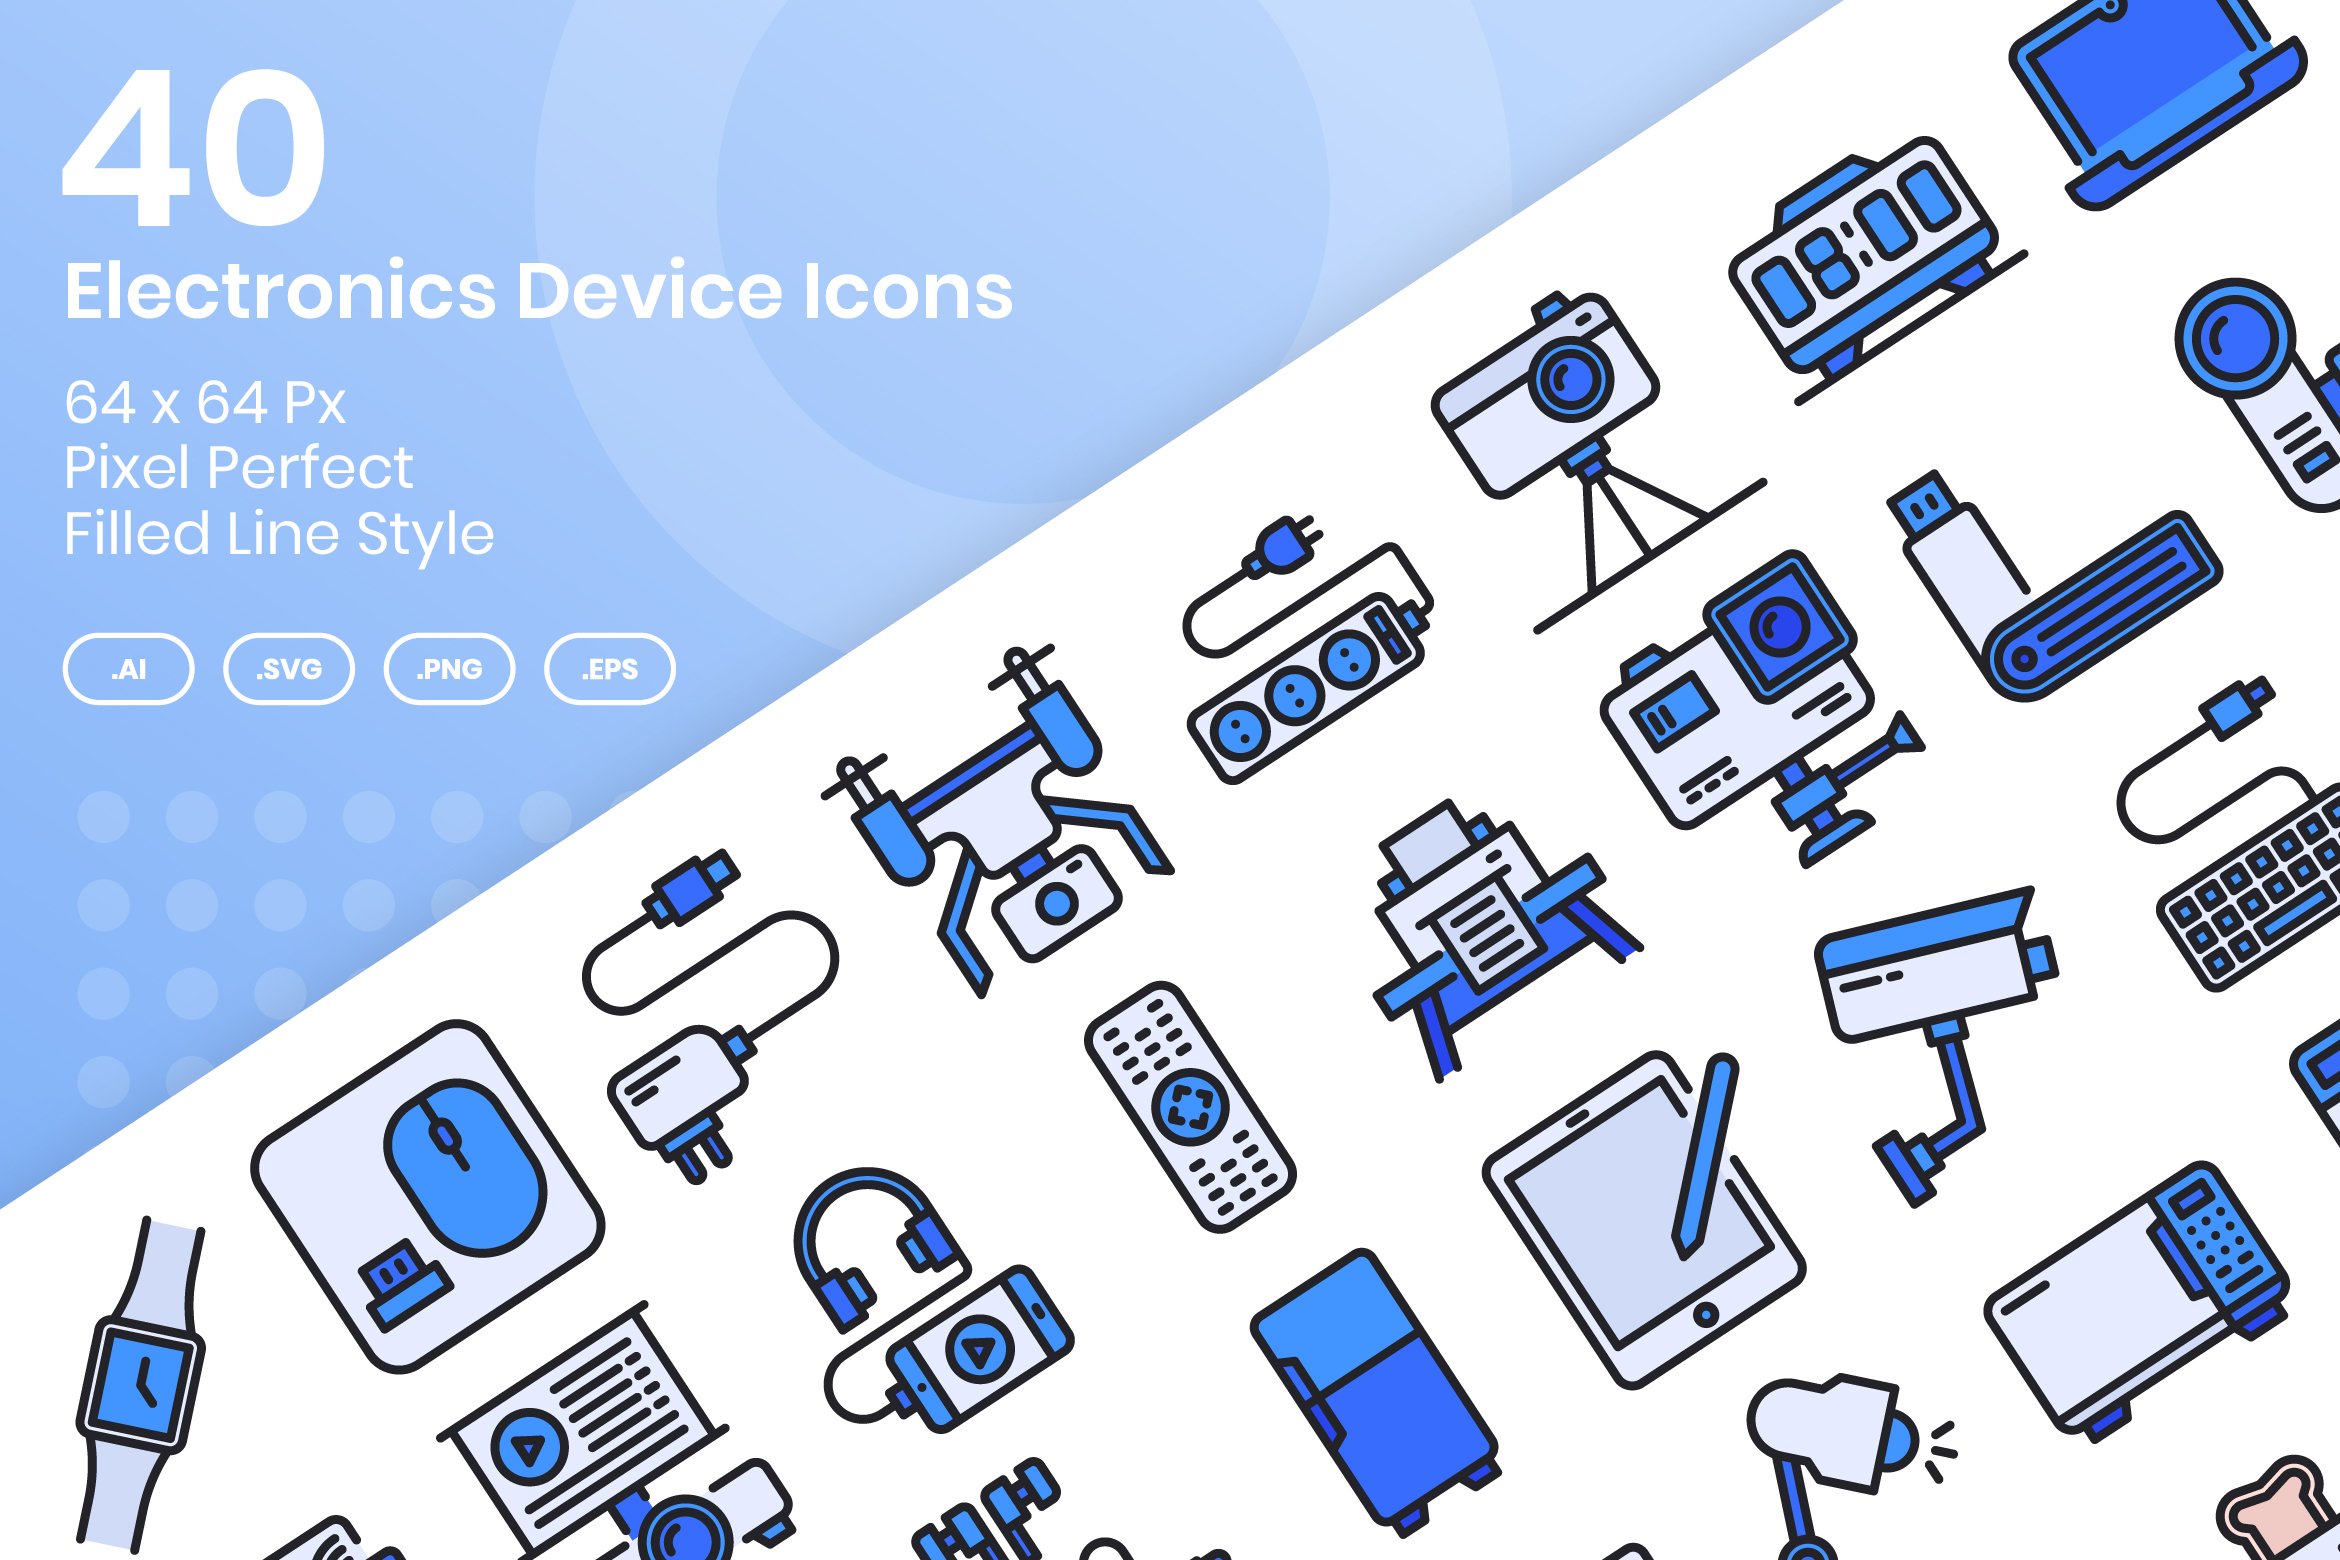 40 Electronic Device - Filled Line cover image.